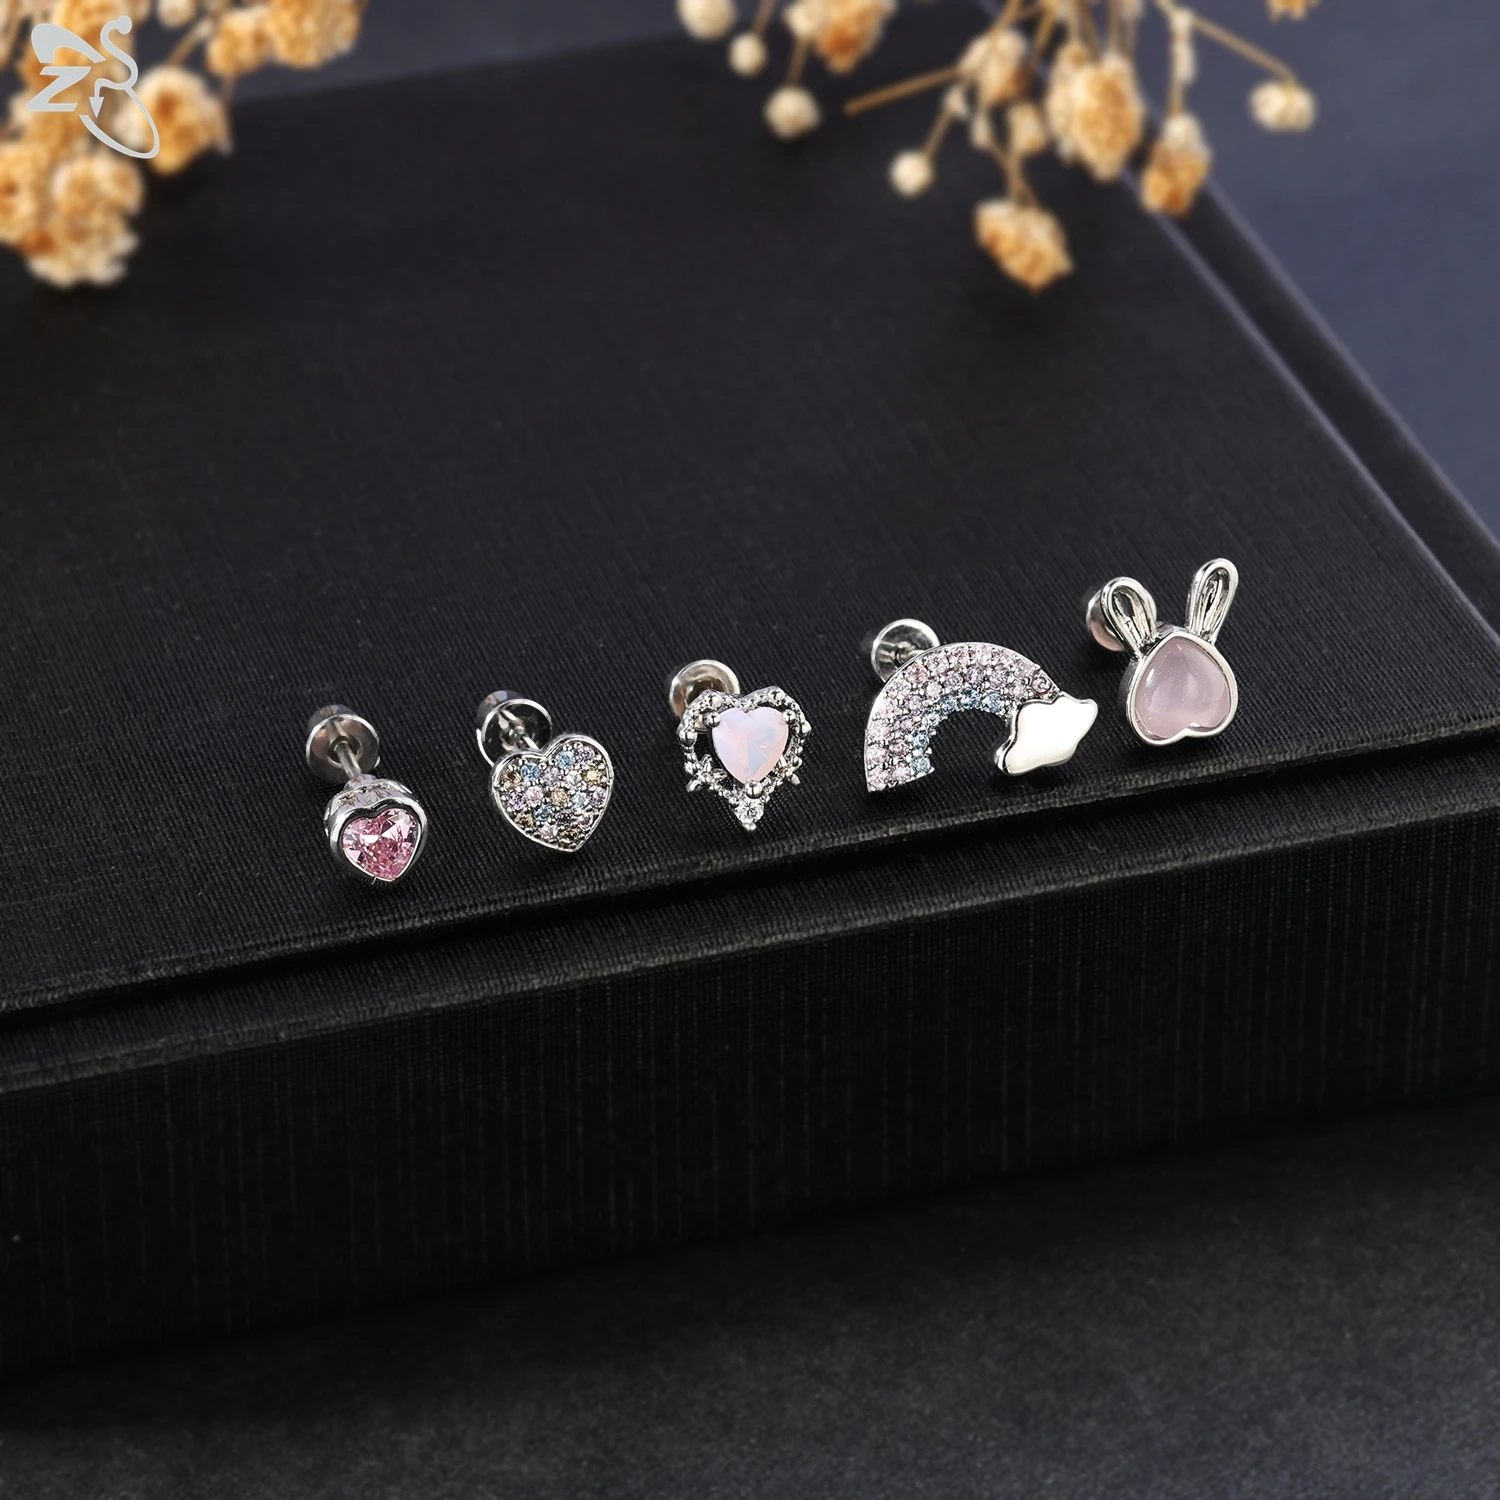 ZS 1-2pcs/Lot 20G Stainless Steel Stud Earrings For Children Cute Animals Earring CZ Crystal Cartilage Helix Piercings Jewelry